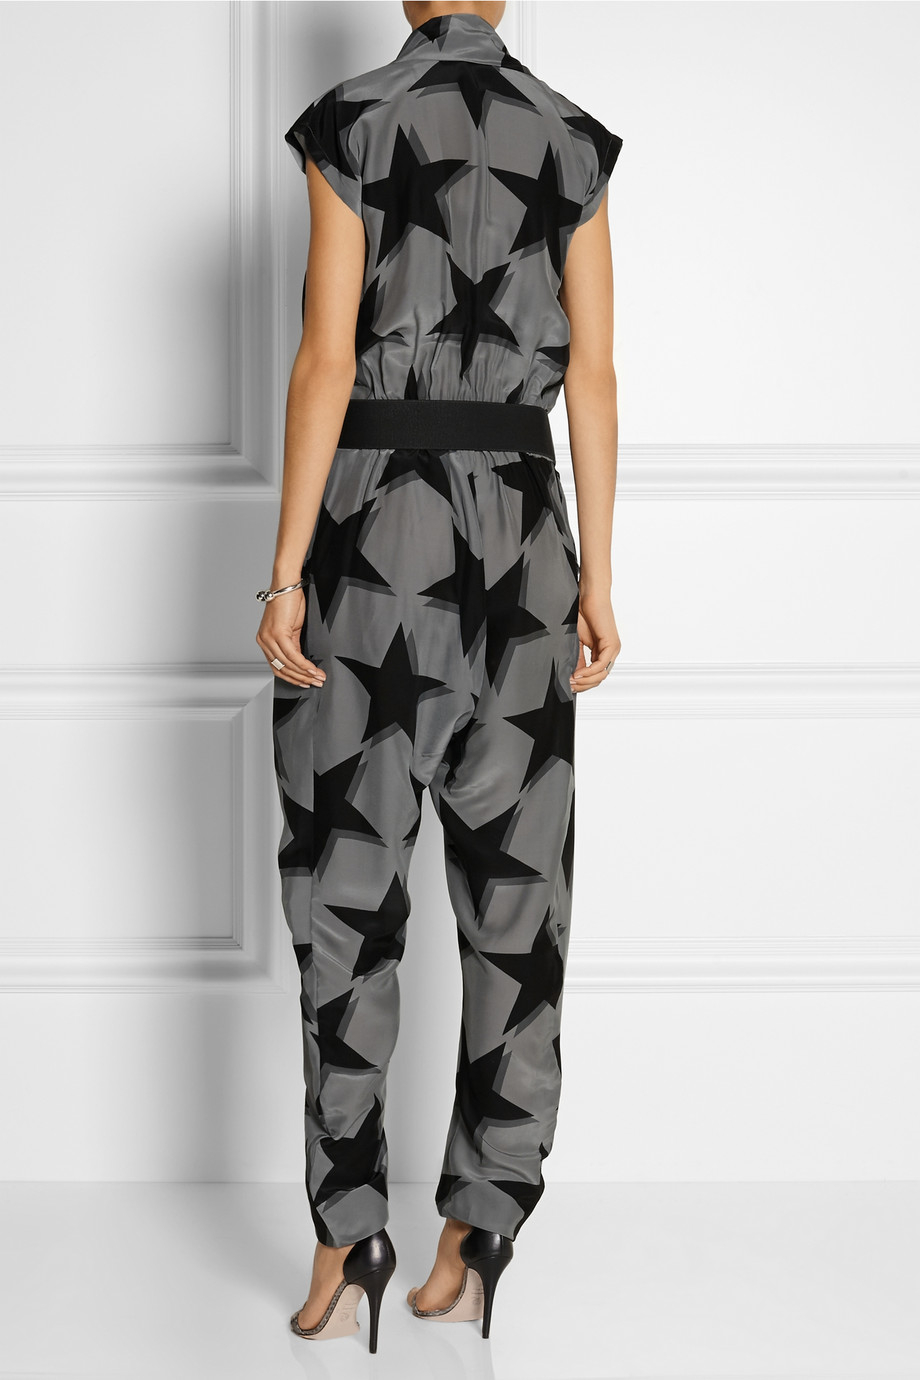 Lyst - Vivienne westwood anglomania Discovery Star-print Jumpsuit in Gray